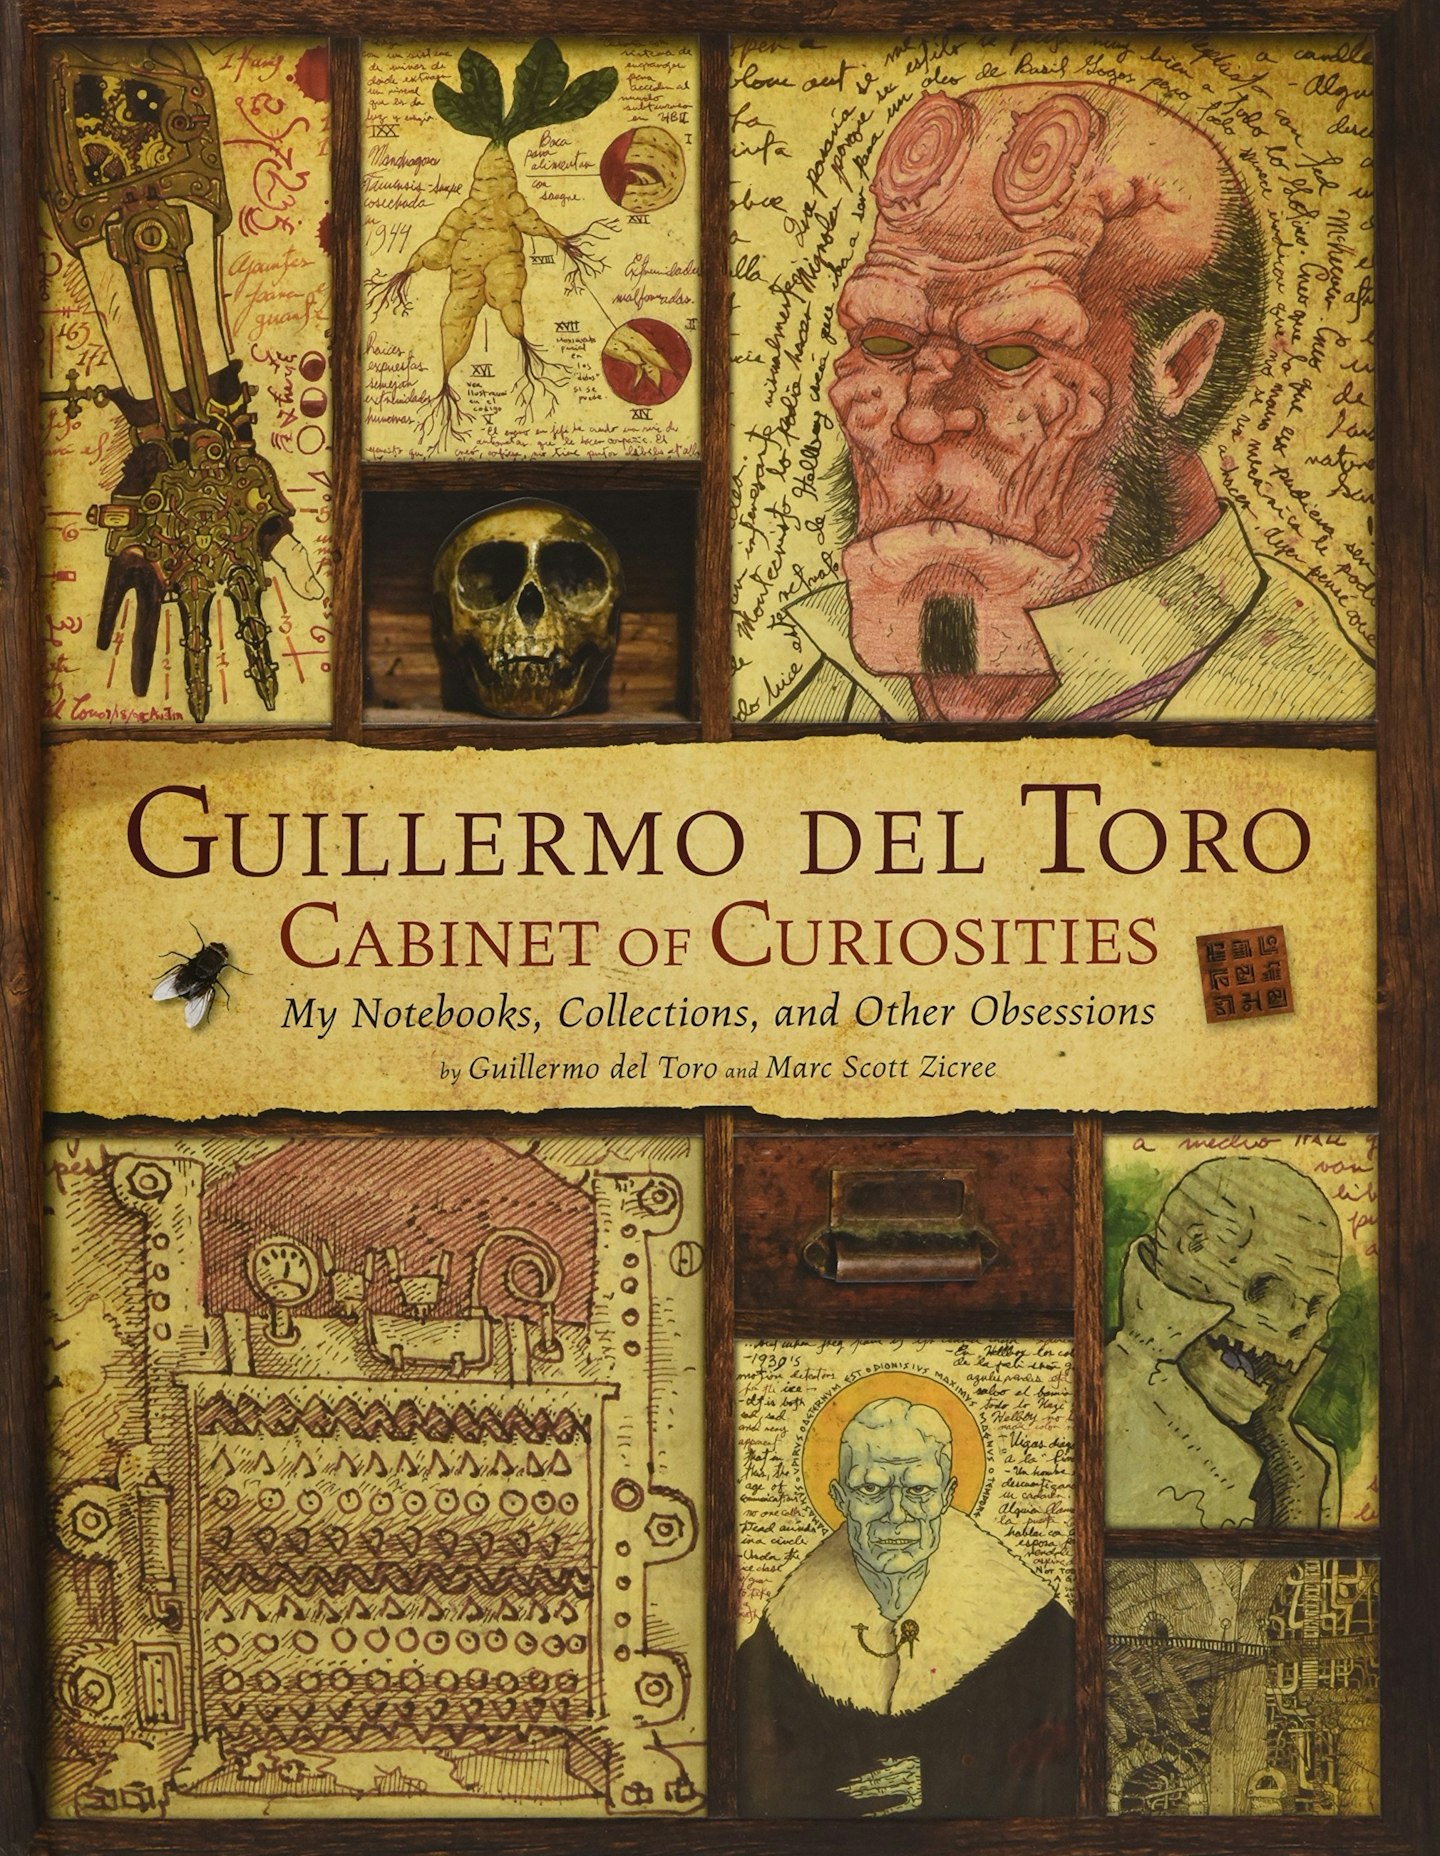 Guillermo del Toro Cabinet of Curiosities: My Notebooks, Collections, and Other Obsessions, £25.96